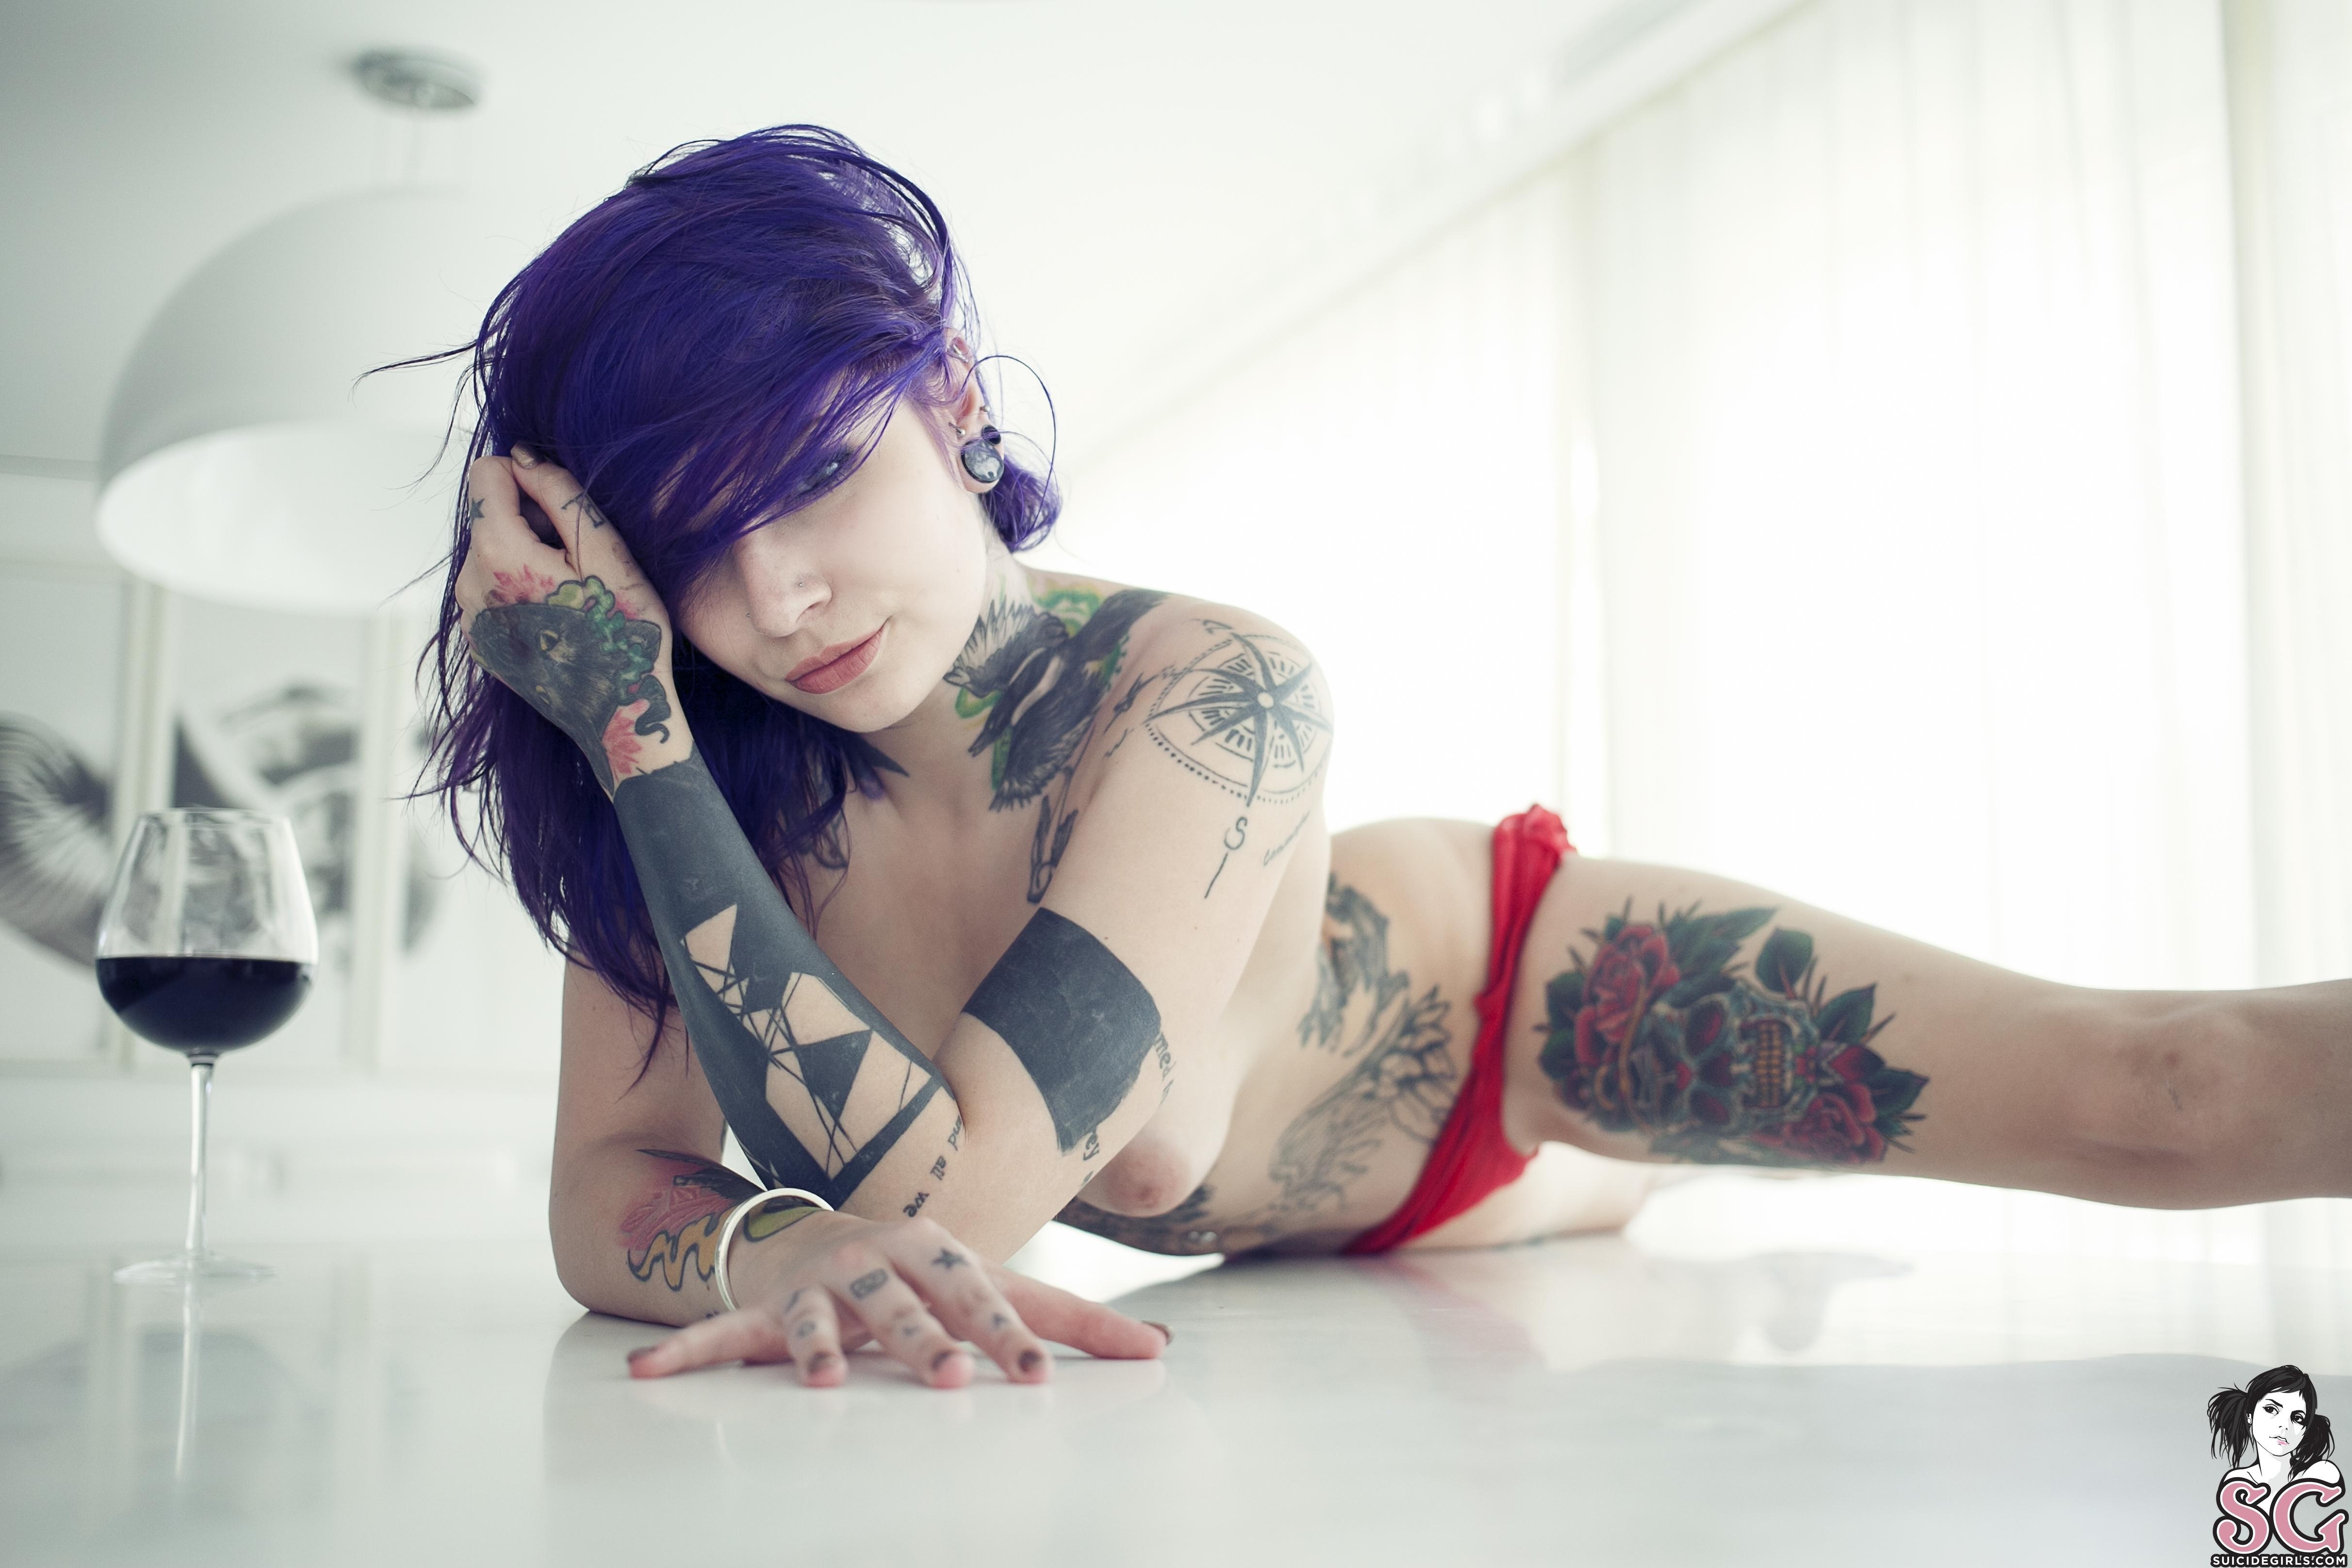 naked girl with tattoos